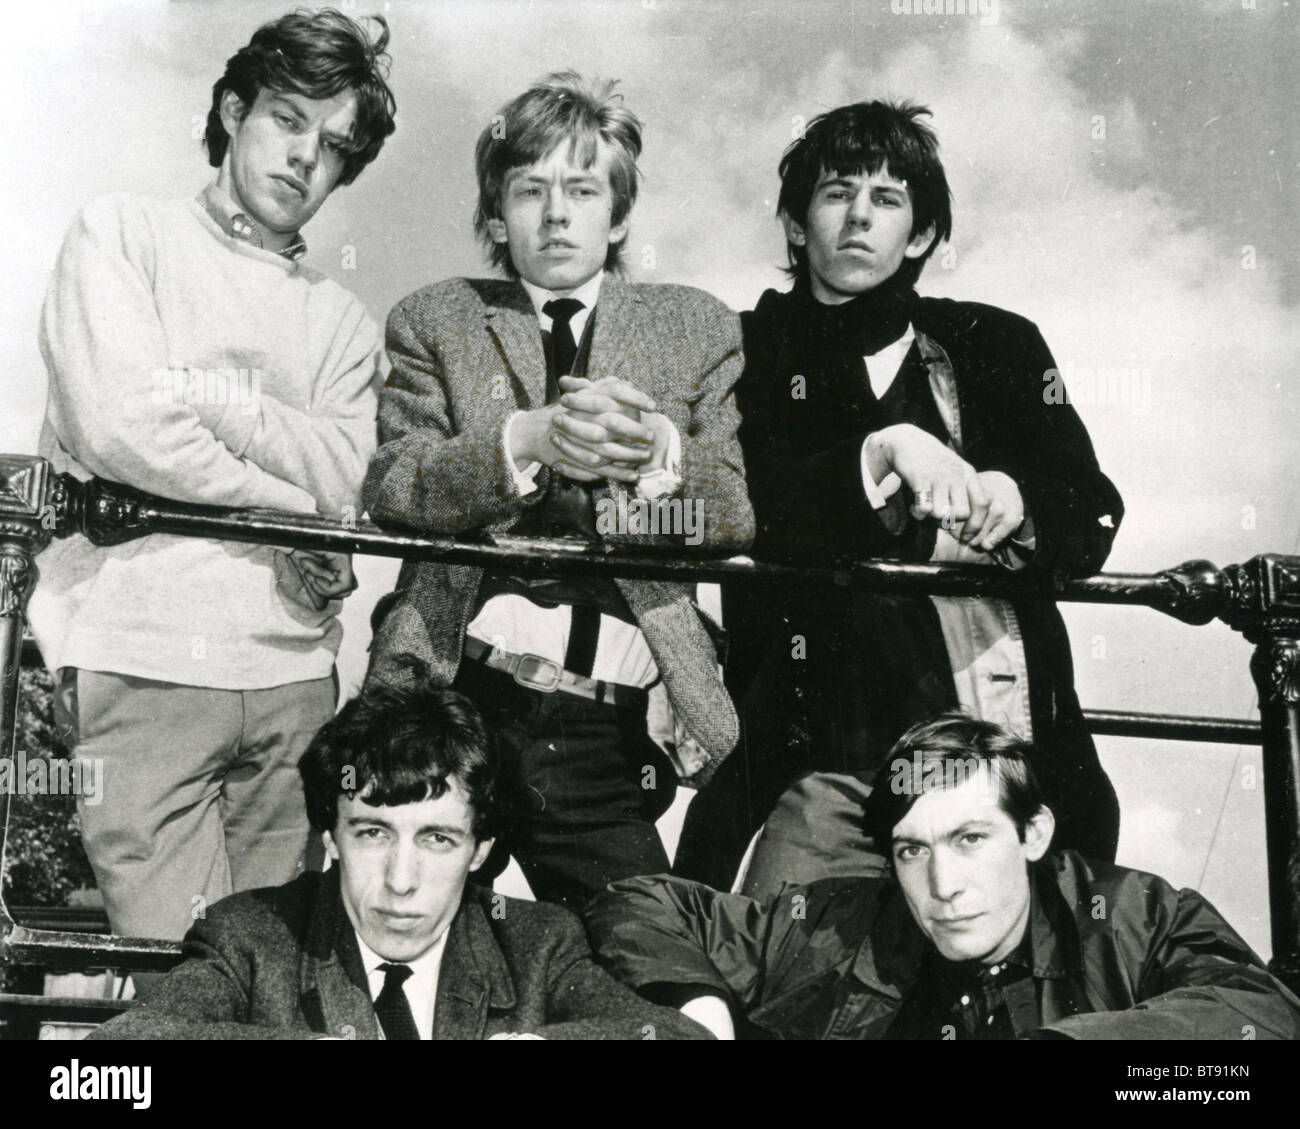 ROLLING STONES in 1963 on the London Embankment. From l: Mick,  Bill,Brian,Keith and Charlie Photo Tony Gale Stock Photo - Alamy